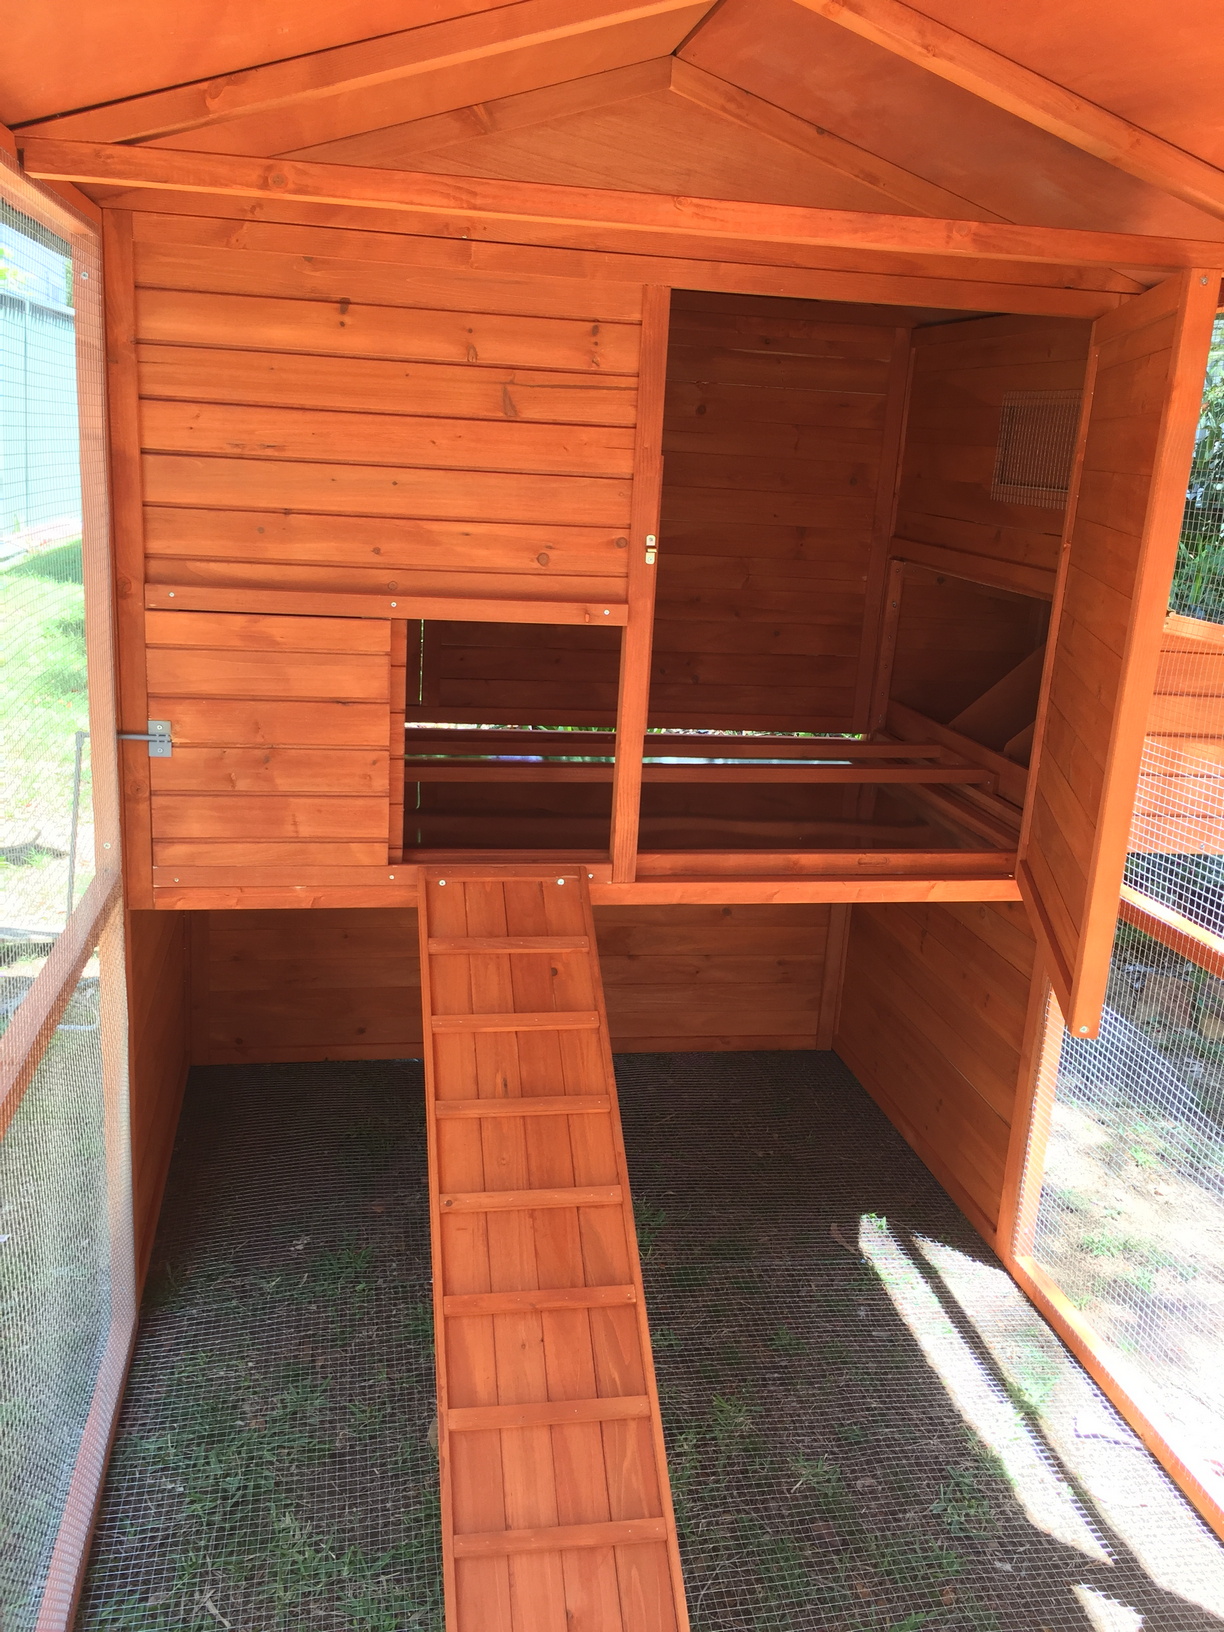 This is the ramp up to the roosting area, showing the front access door open and the entrance to the nesting boxes. Again, notice the mesh floor, which was later removed and used to vermin proof the outside of the coop.